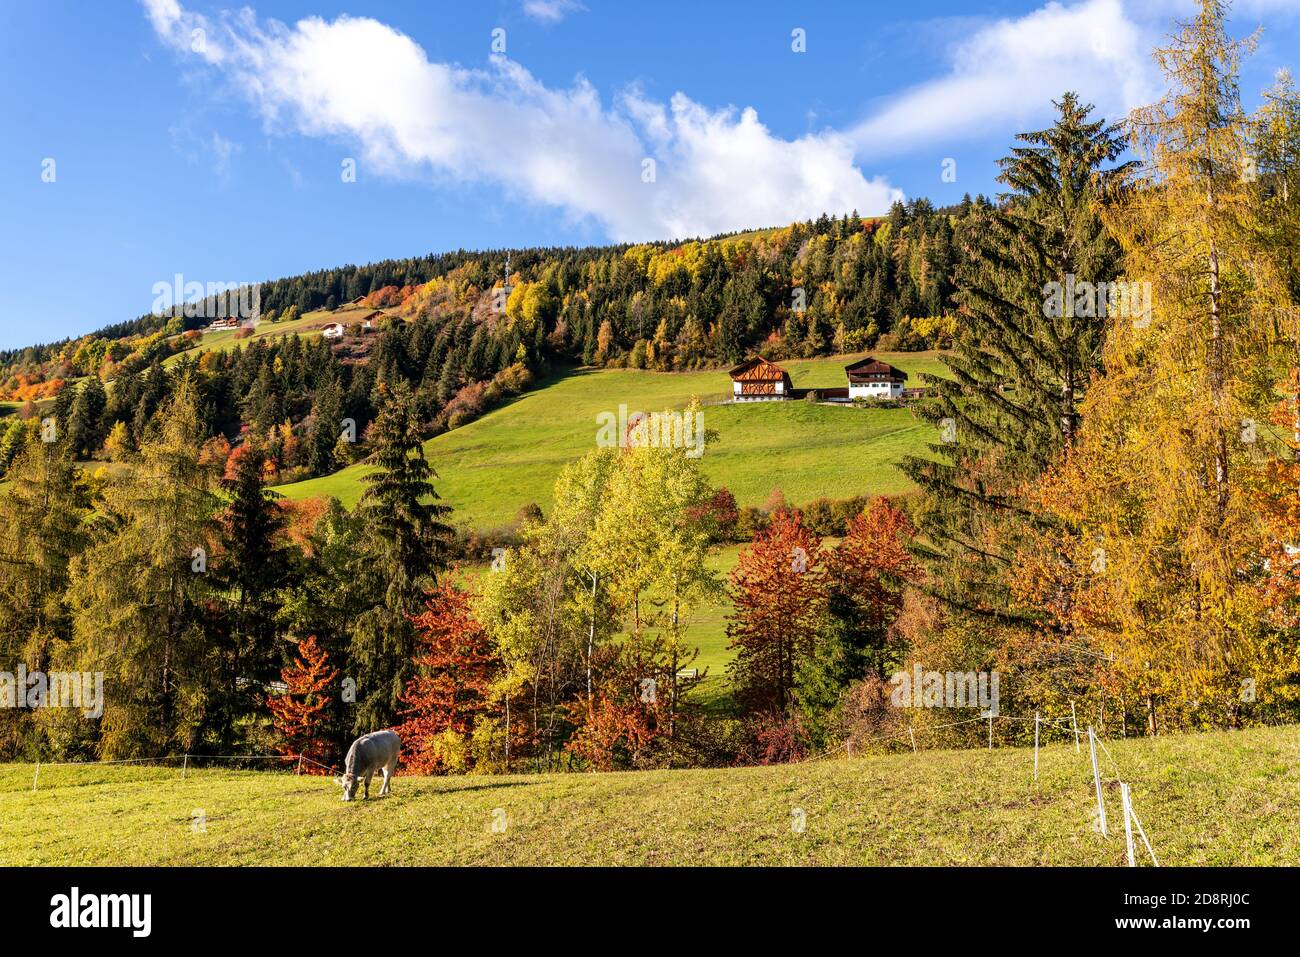 Funes Valley, Trentino, Italy. Autumn landscape with fall colors.  Stock Photo